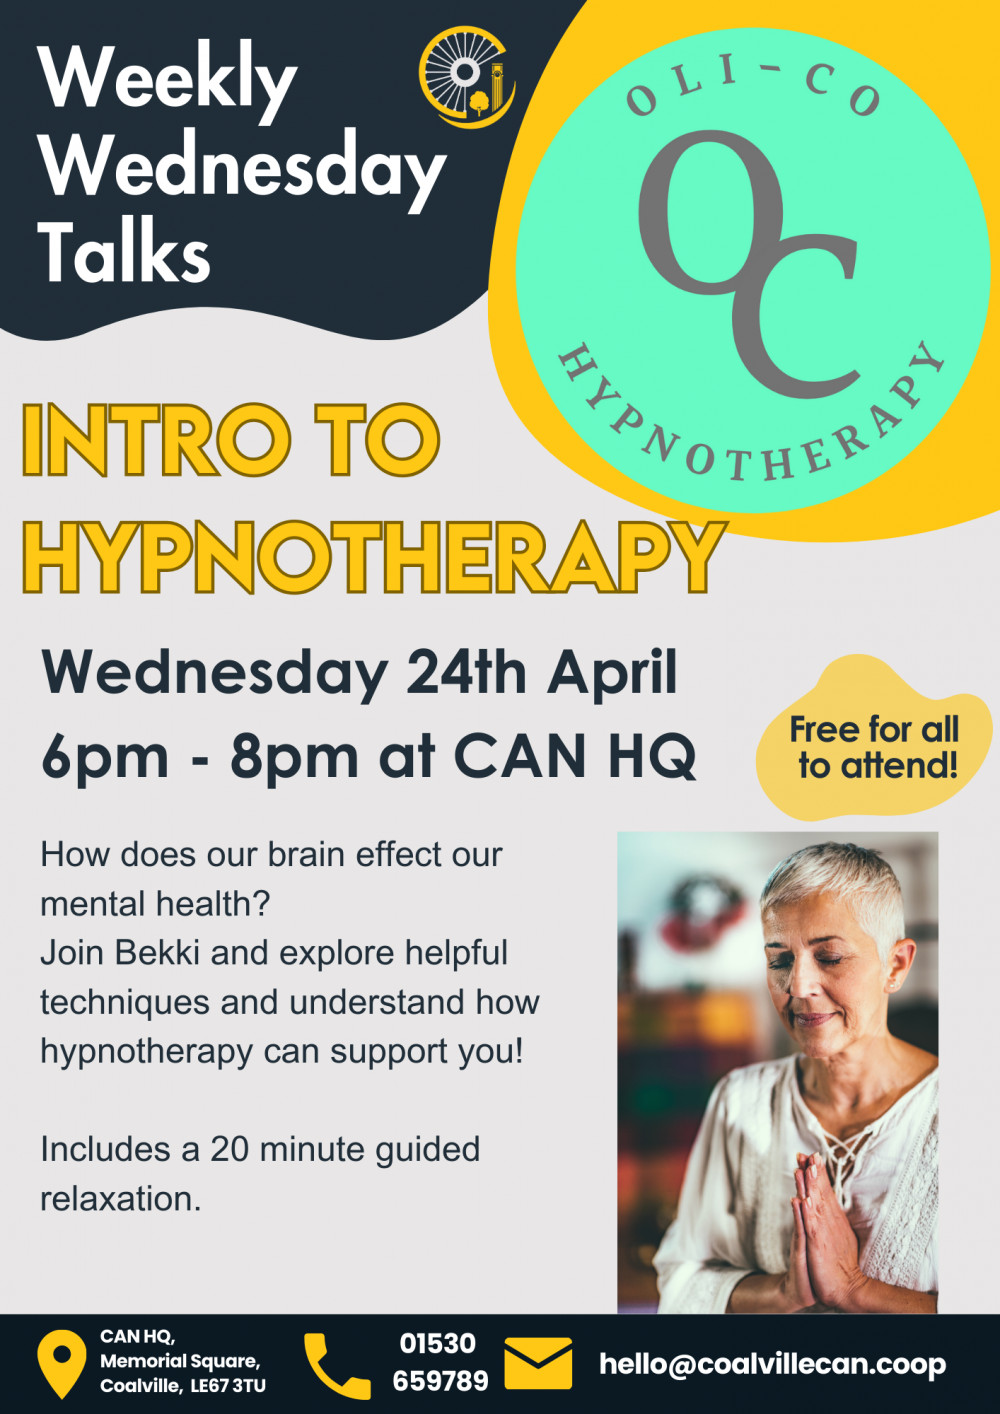 Intro to Hypnotherapy - With Oli-Co Hypnotherapy at CAN HQ, Memorial Square, Coalville